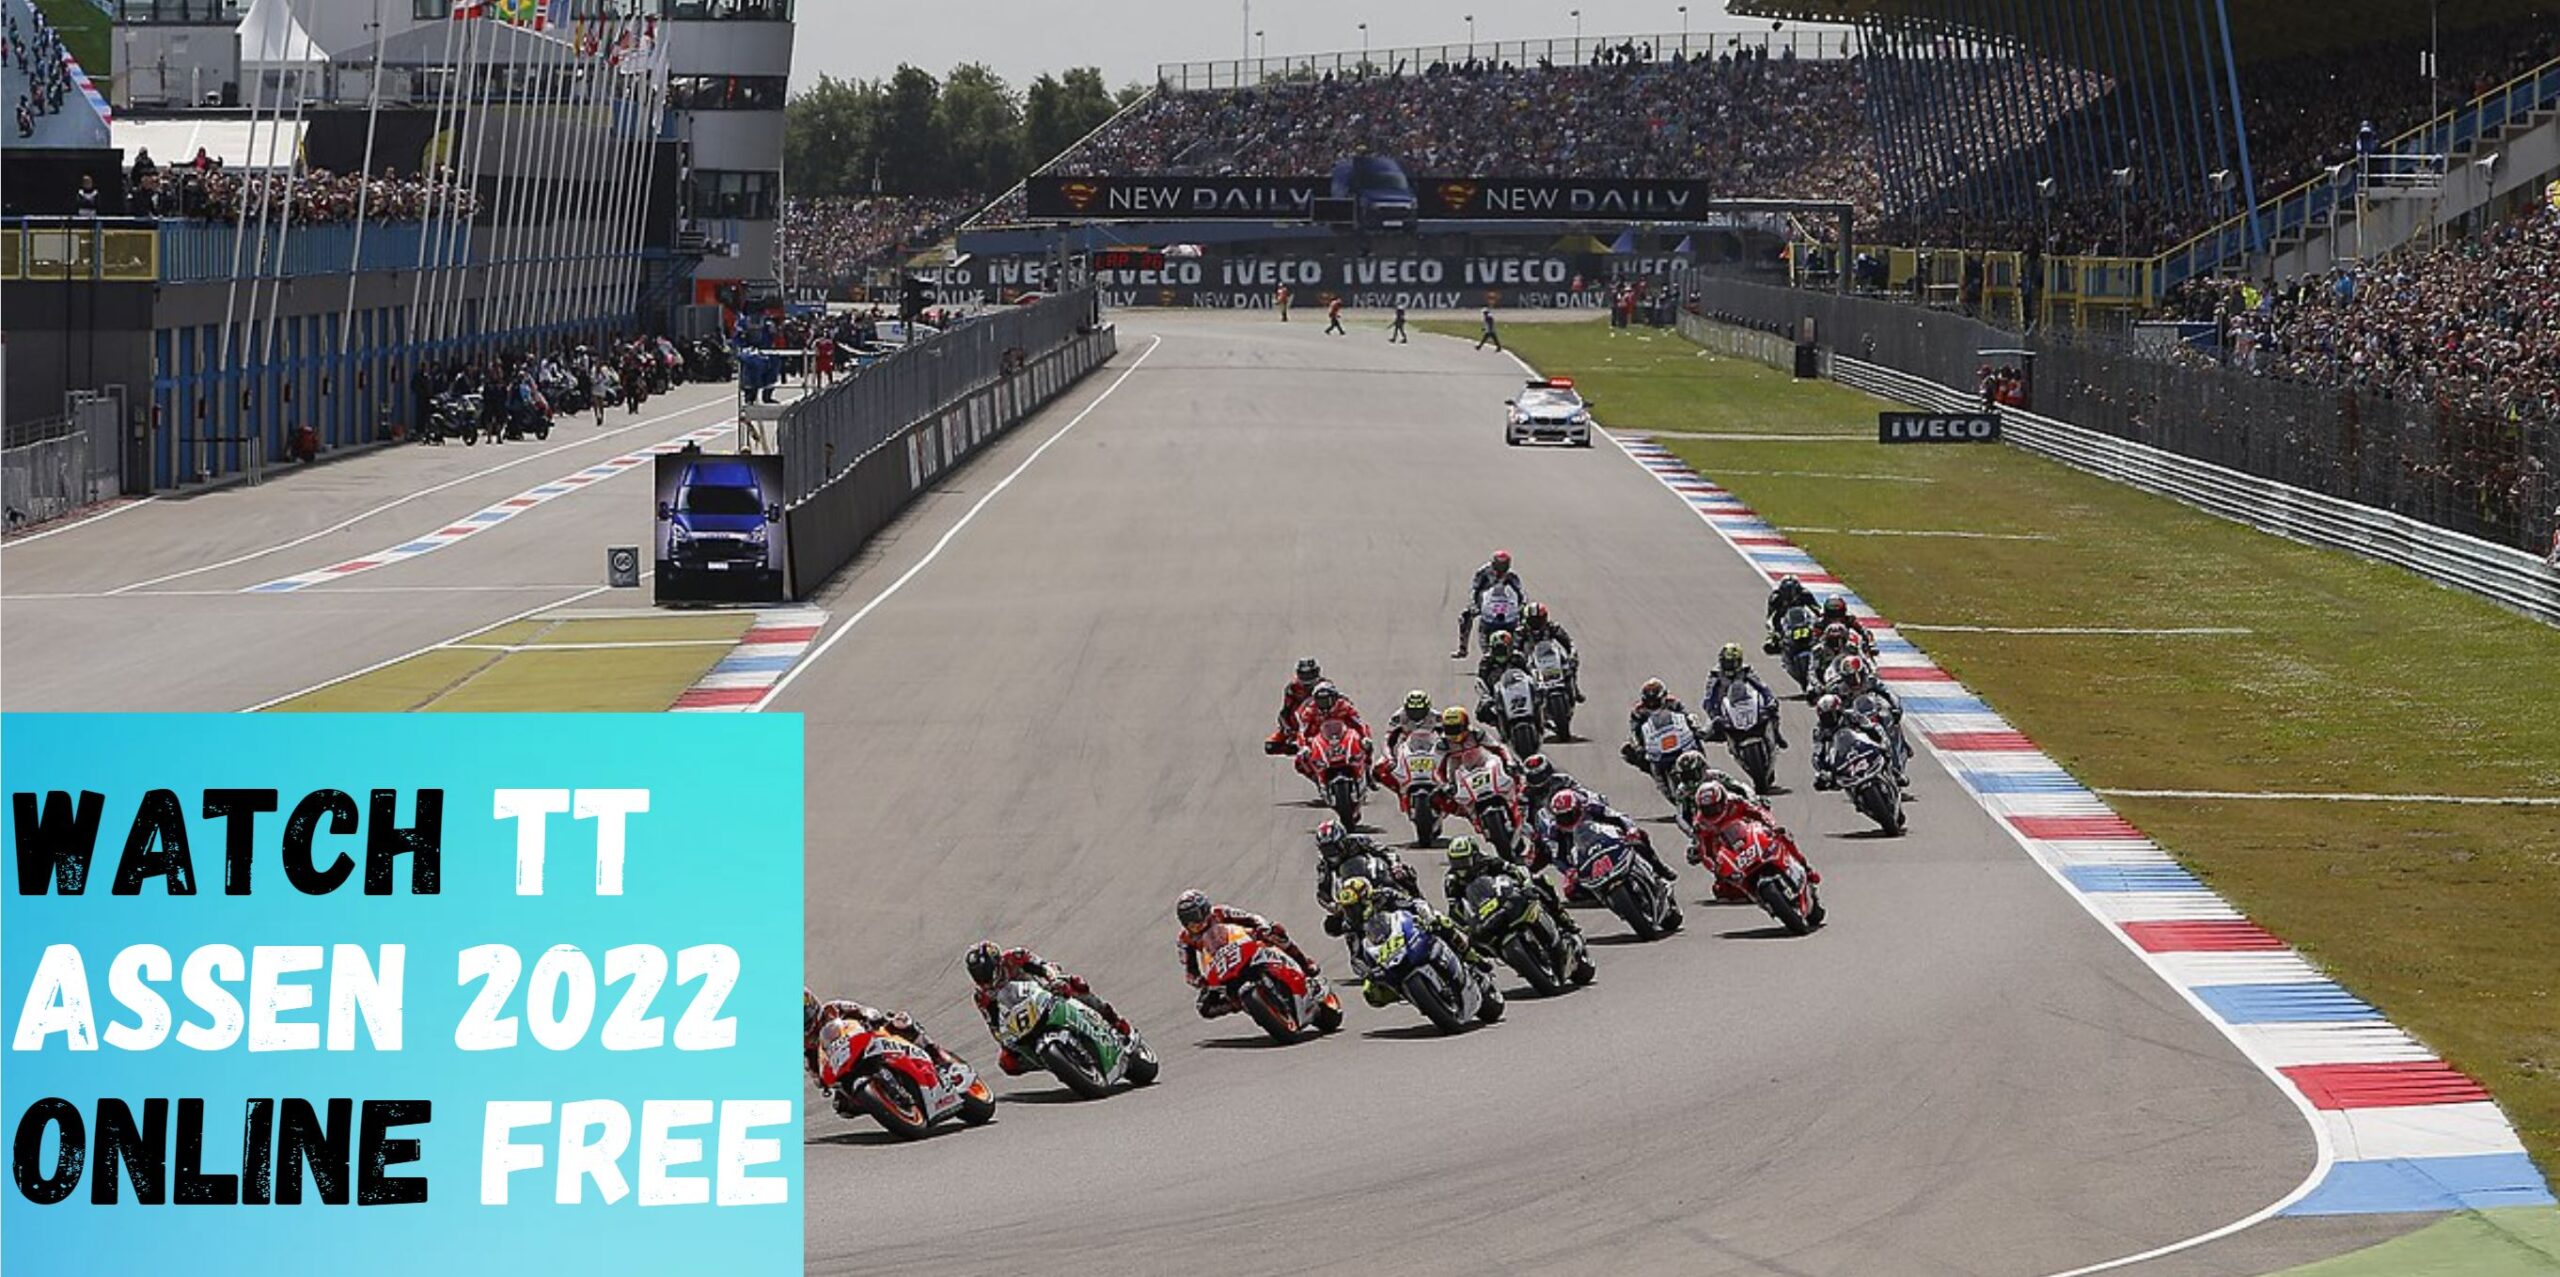 How to watch TT Assen 2022 Live online for free